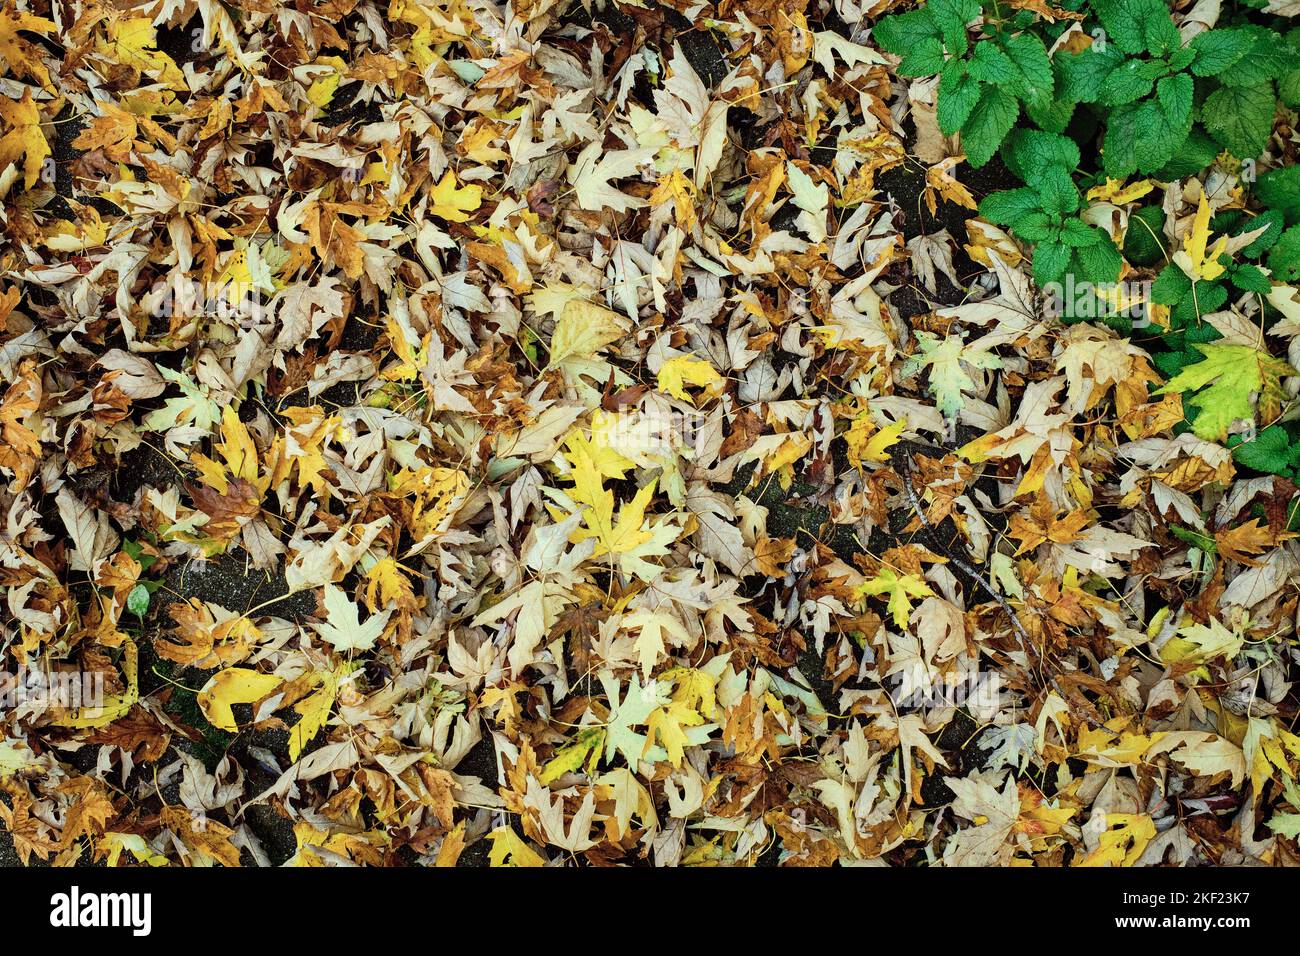 a thick mat of fallen yellow and orange leaves on the ground in the back yard in late autumn with a small patch of green mint plant leaves Stock Photo